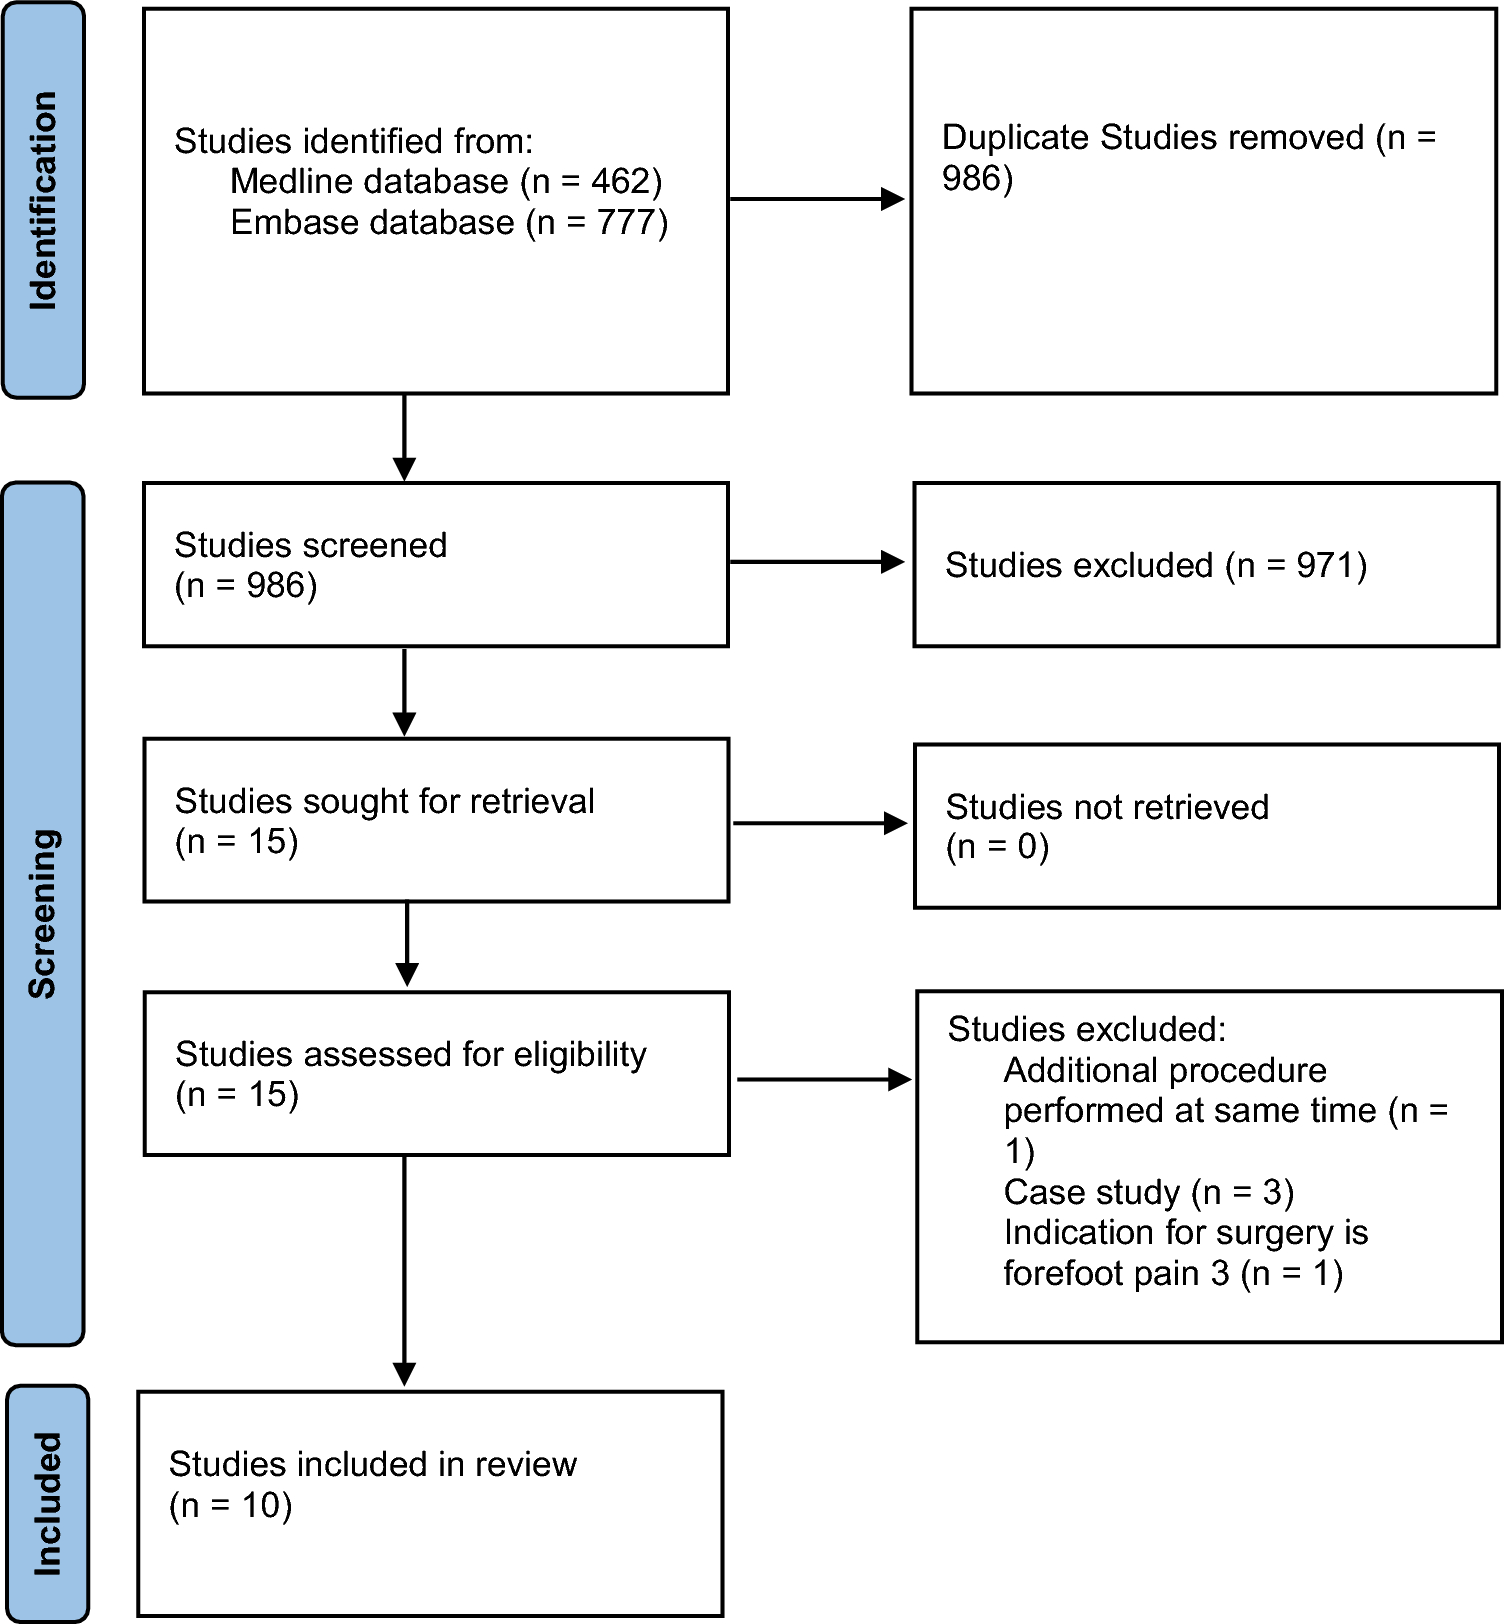 Gastrocnemius Release in the Treatment of Achilles Tendinopathy: A Systematic Review